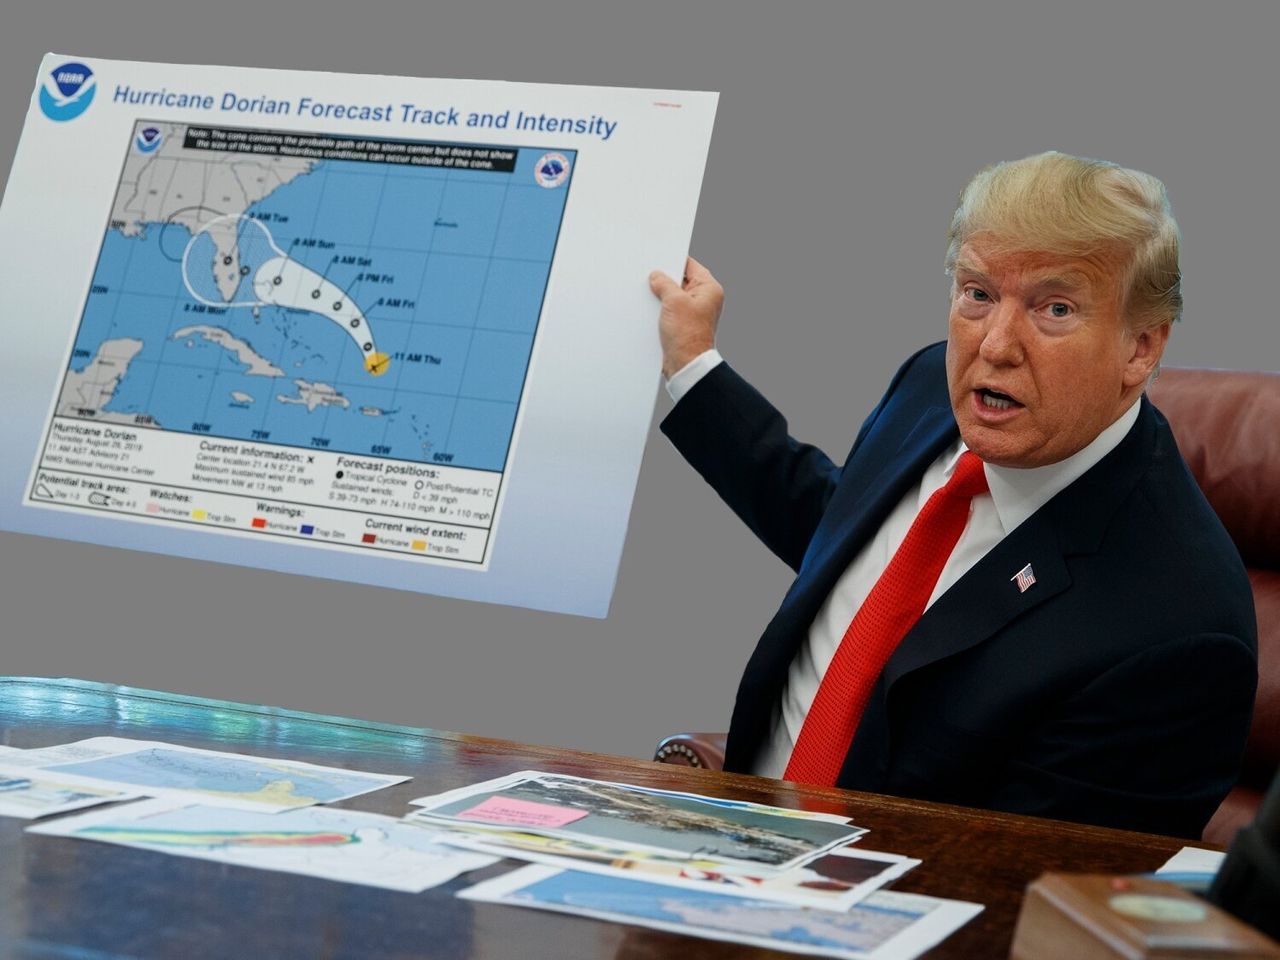 Trump holds a Hurricane Dorian forecast tracking chart -- adjusted by a Sharpie -- as he talks with reporters in the White House Oval Office.